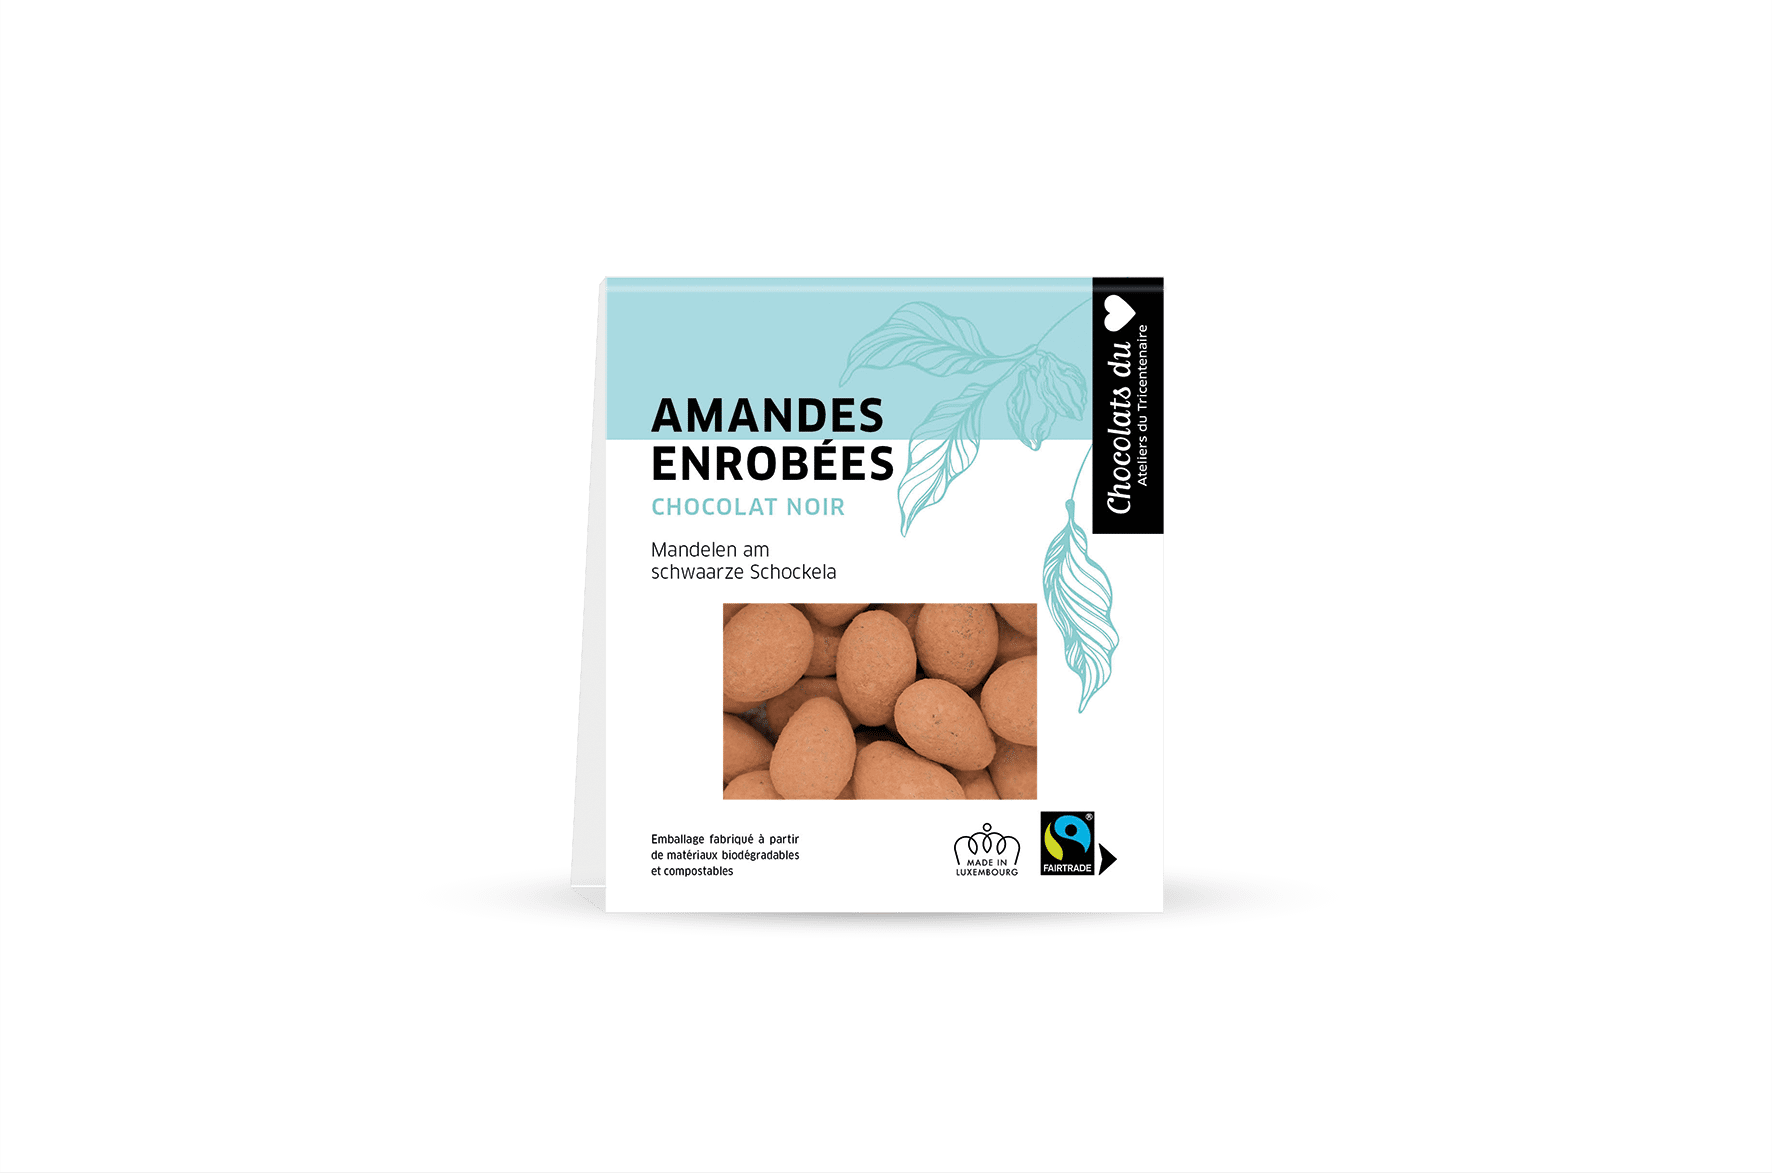 Almonds coated with Fairtrade dark chocolate (80g)